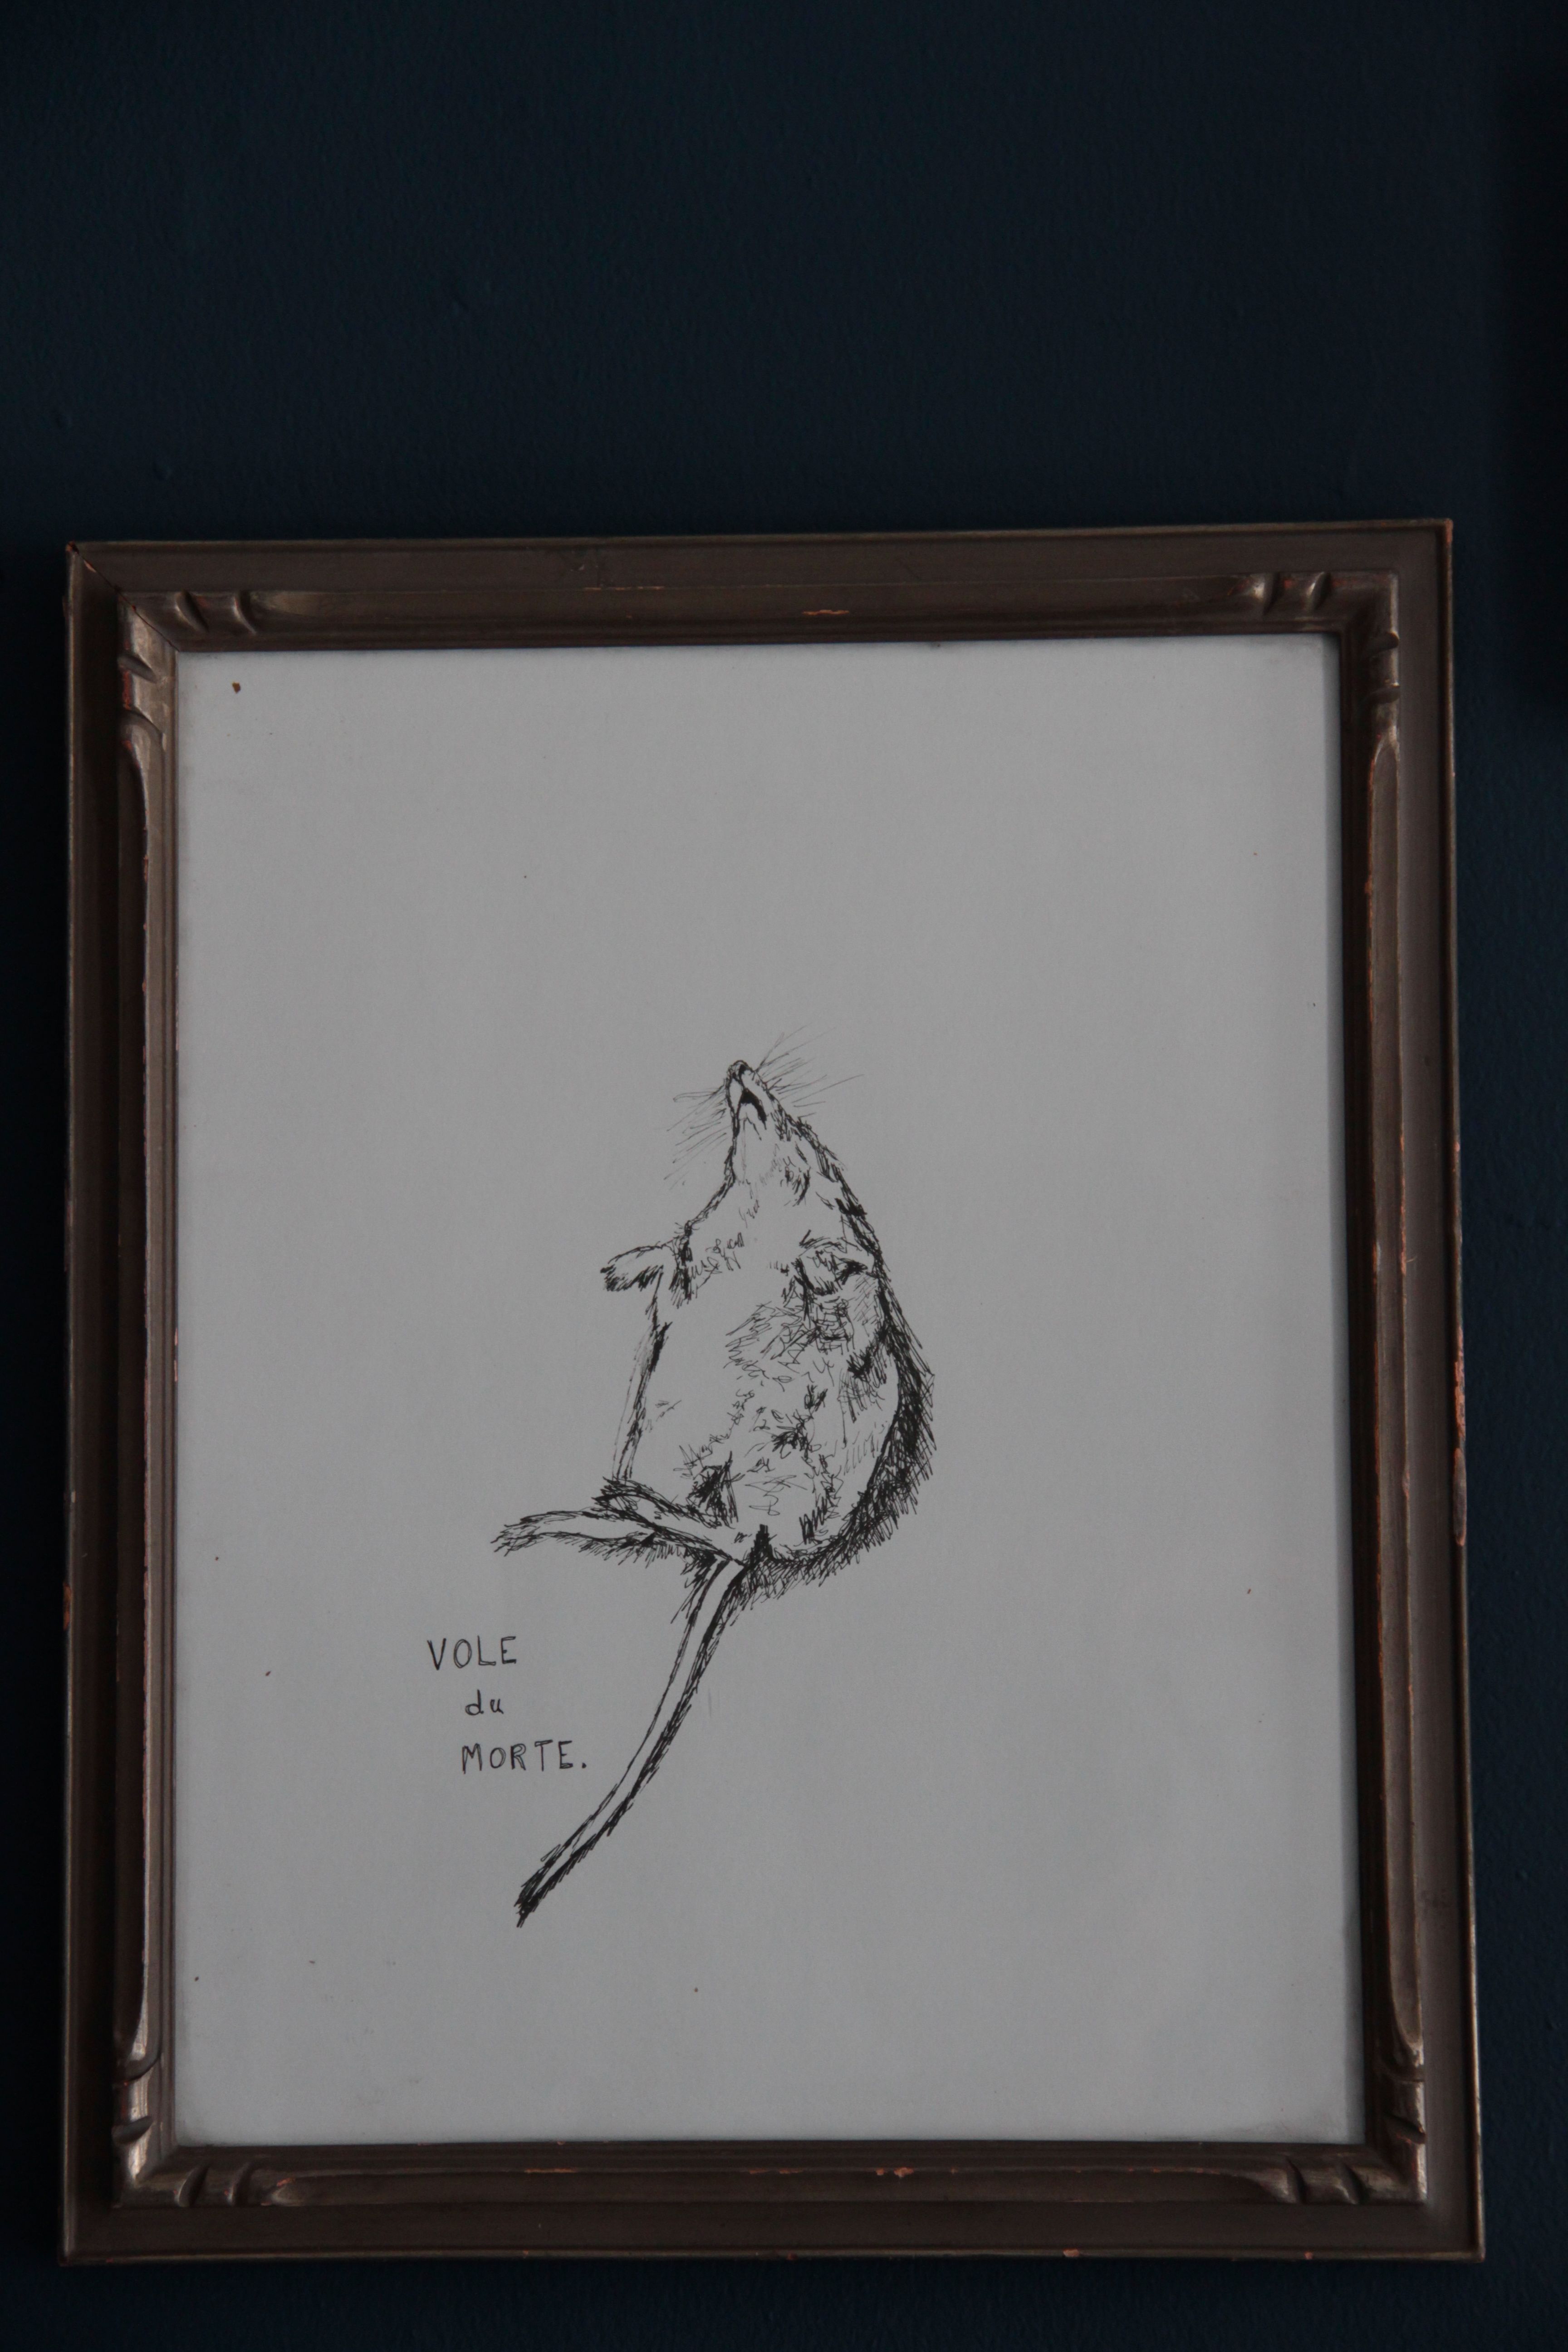 I drew this from a picture I took of a dead rodent in Massachusetts. I found the animal kind of beautiful in its gruesome end. I don't think it's actually a vole, but the pun was too funny not to include. Vintage frame.